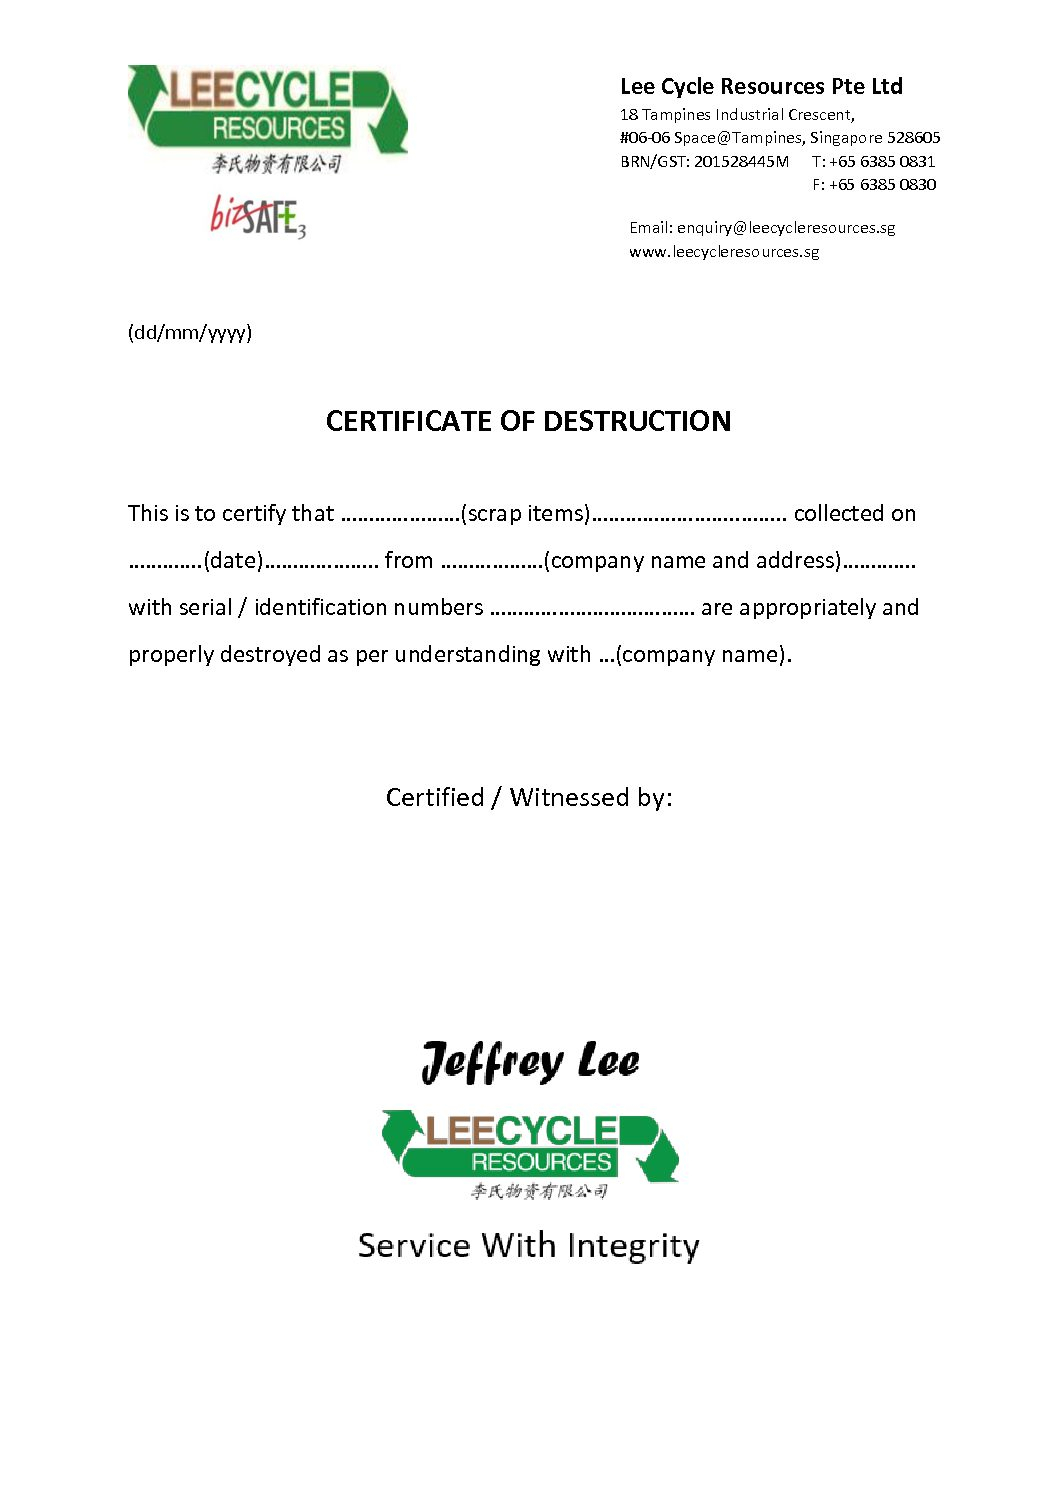 Certificate Of Destruction - Leecycle Resources Singapore Within Certificate Of Disposal Template